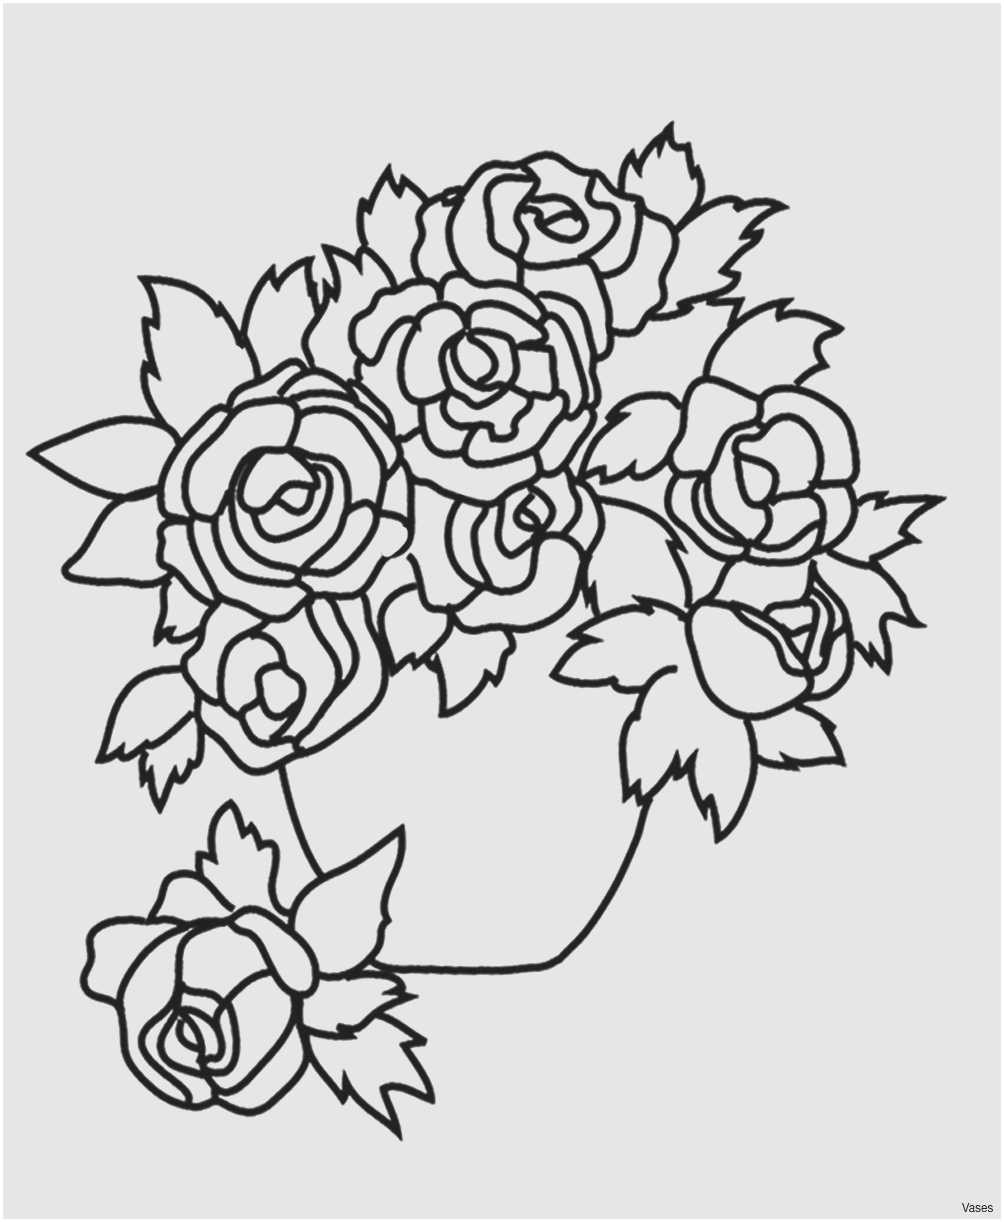 28 Cute Stained Glass Flower Vase 2024 free download stained glass flower vase of 16 lovely flowers in a tall white vase bogekompresorturkiye com with vases flowers in vase coloring pages a flower top i 0d flowers awesome